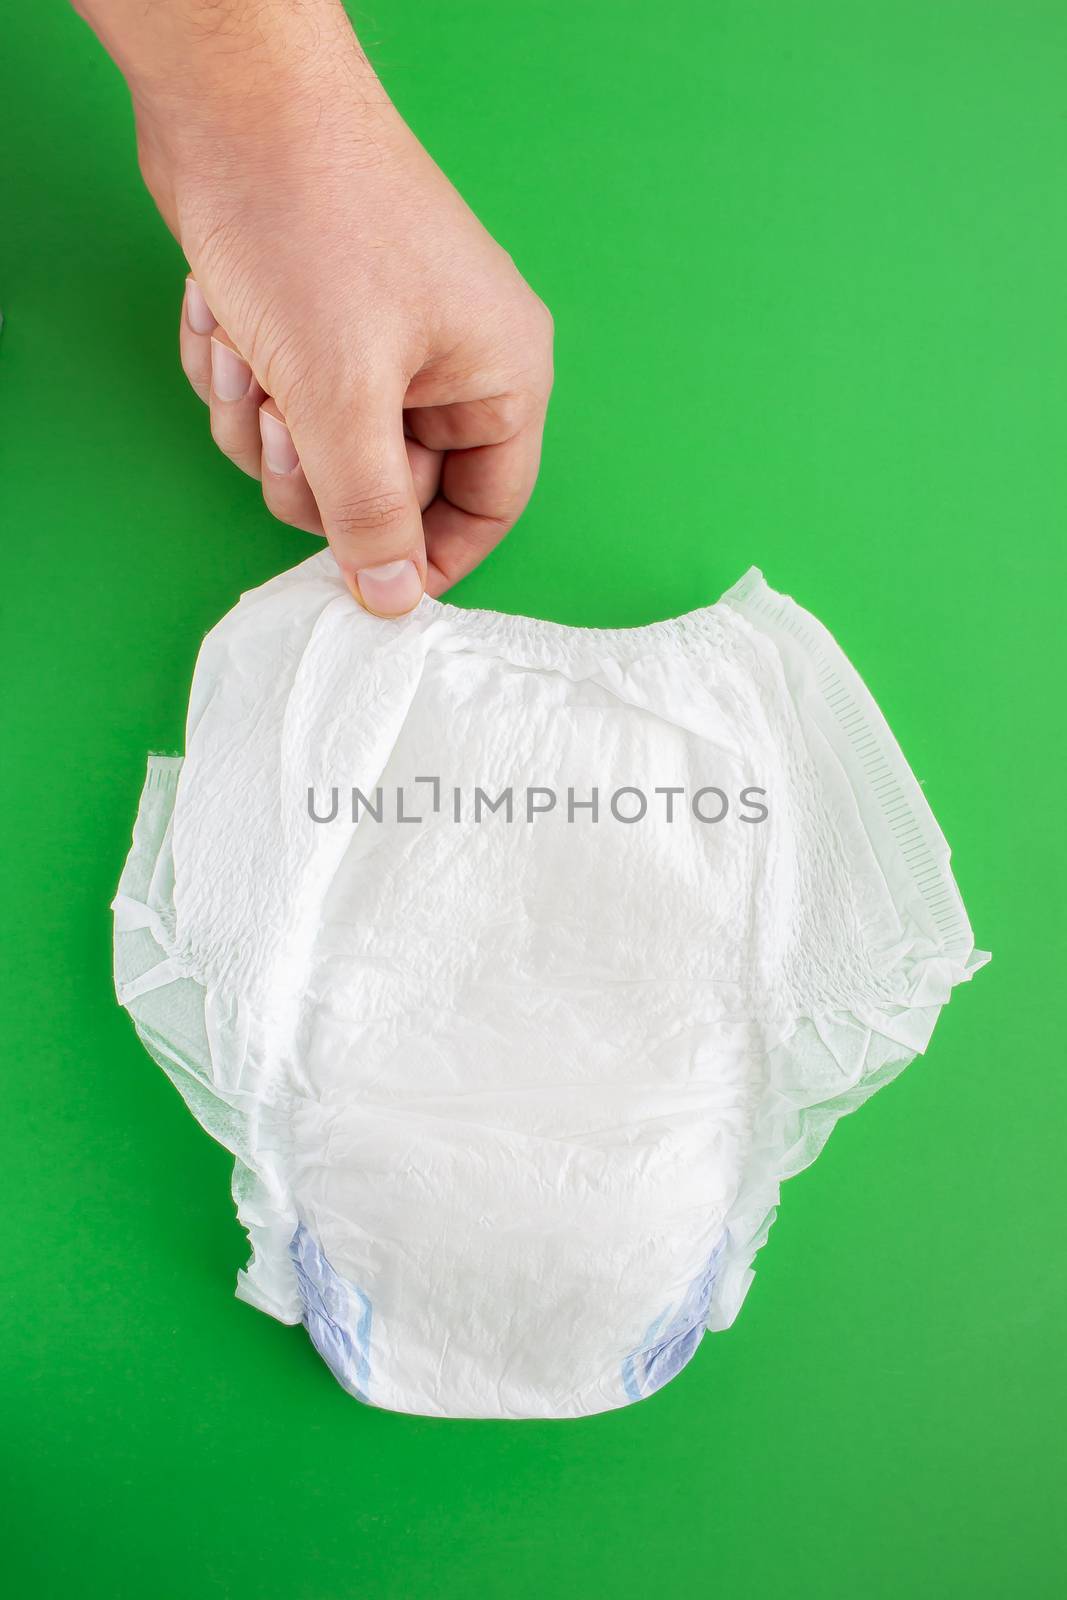 A person holding a diaper on a green background by oasisamuel